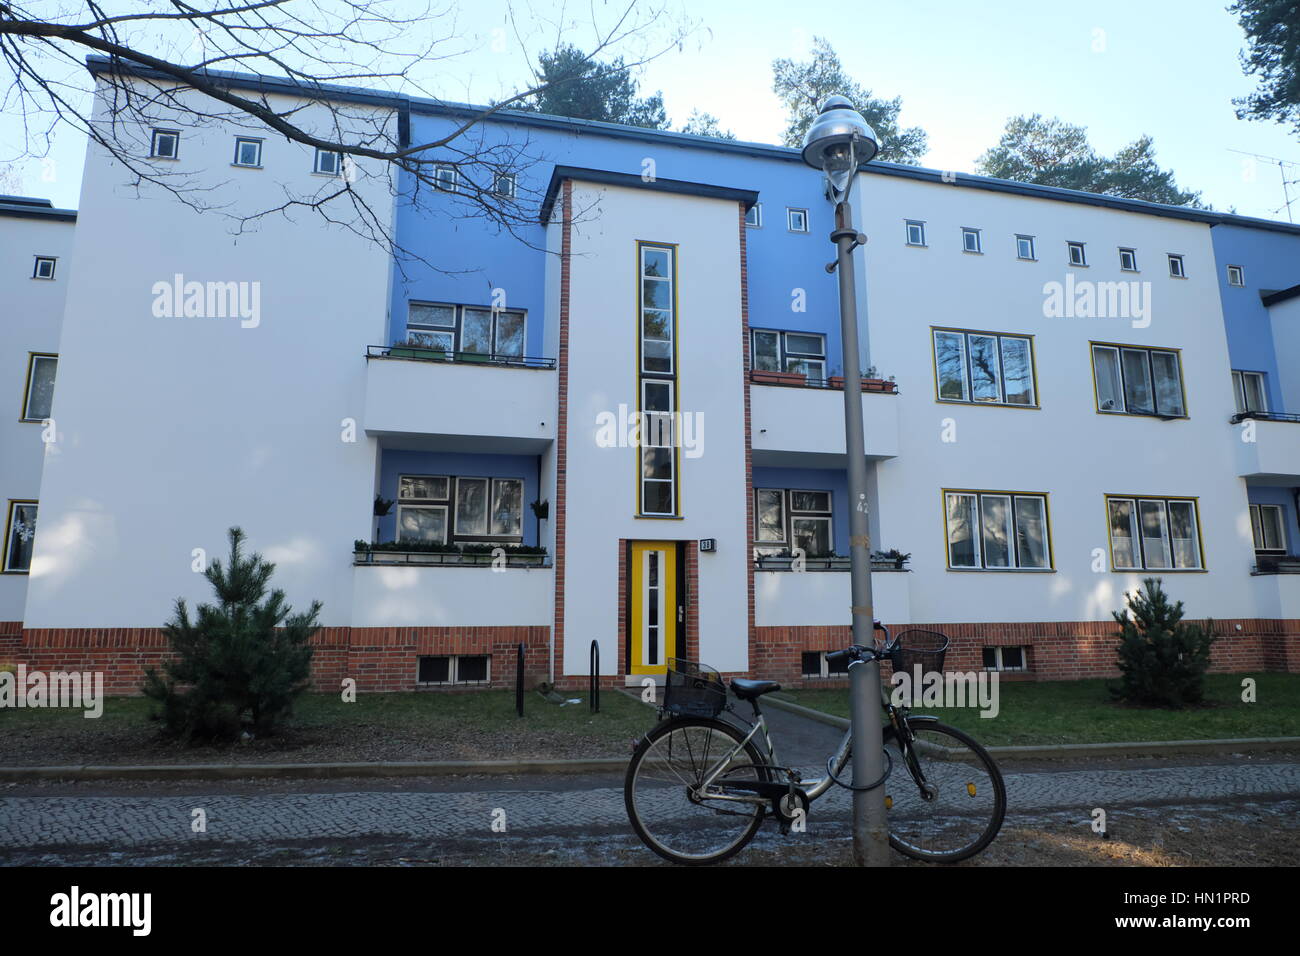 1920's Housing by Bruno Taut, Onkel Tom's Hutte, Berlin Stock Photo - Alamy